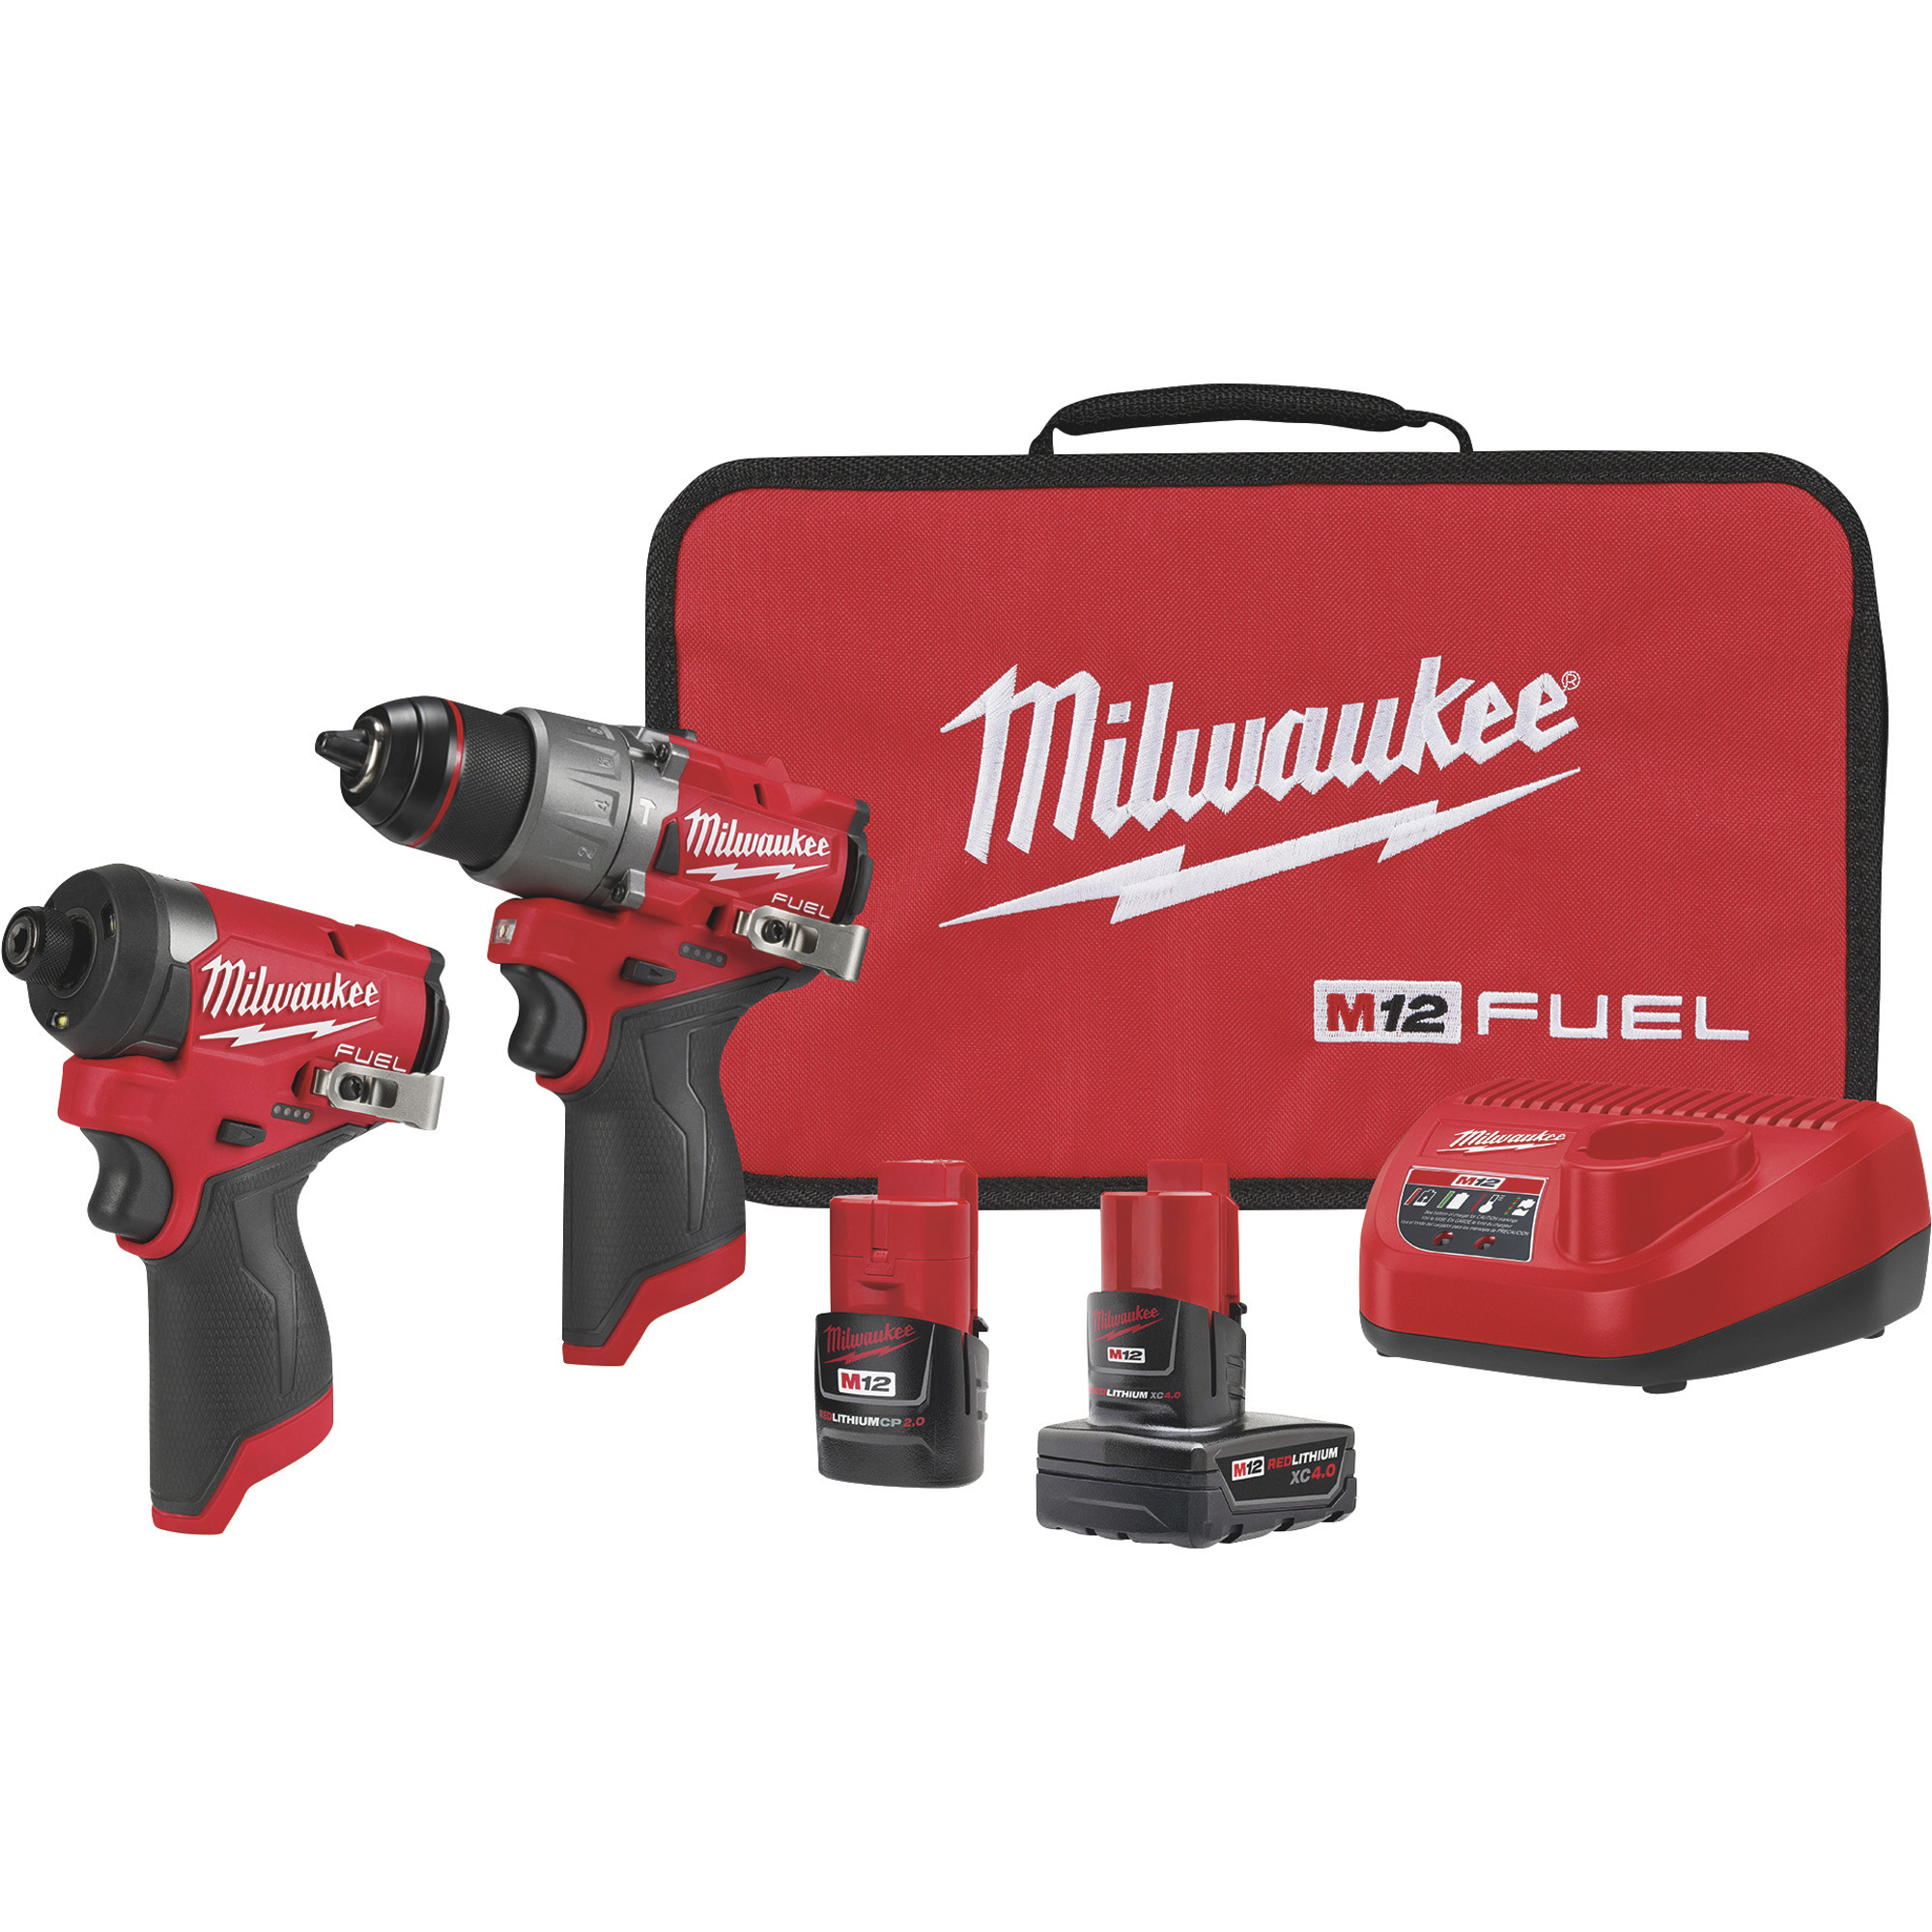 Milwaukee M12 FUEL 2-Tool Combo Kit, 1/2Inch Drill Driver, 1/4Inch Hex Impact Driver, 2 Batteries, Charger, Model 3497-22